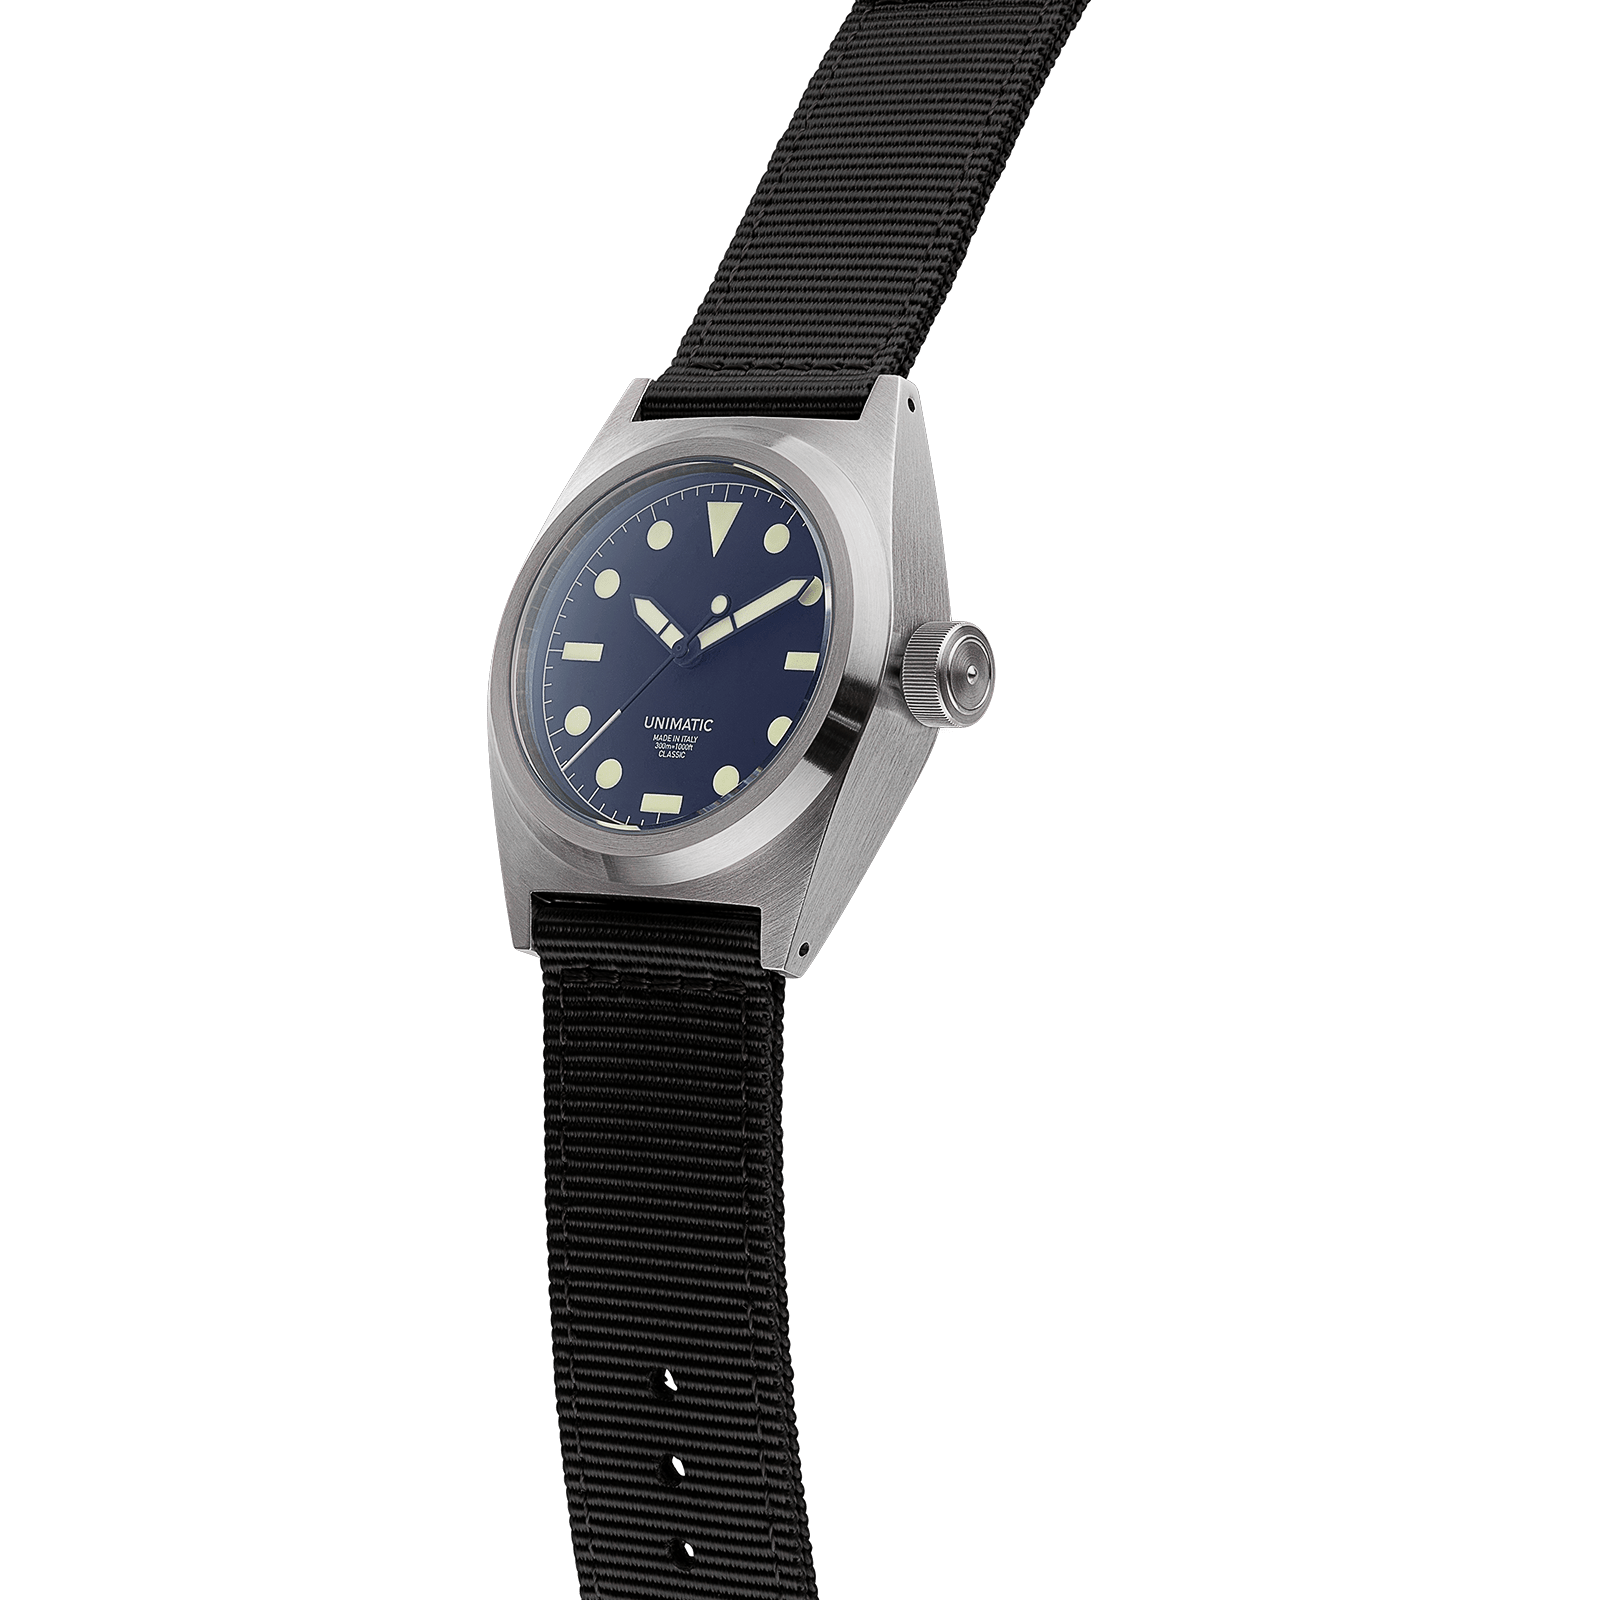 https://www.unimaticwatches.com/wp-content/uploads/2021/06/UC-2-Angle.png